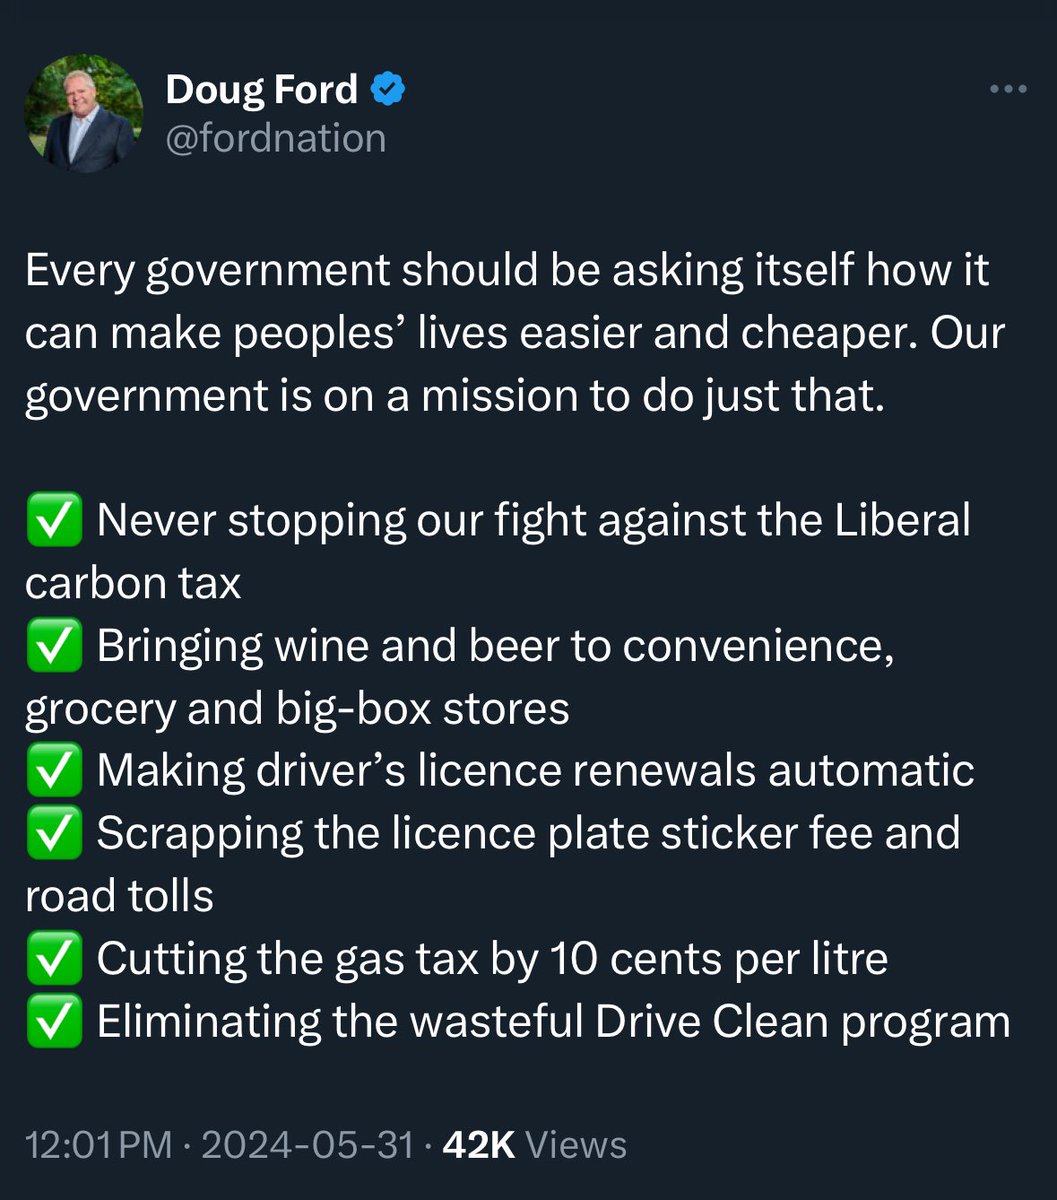 This is actually the Ontario Premier’s priority list. I can’t believe this isn’t satire.

Nothing about housing, healthcare, the environment, education, public safety, infrastructure, or stopping hate.

Ontario desperately needs real, serious leadership. This is pathetic.
#onpoli